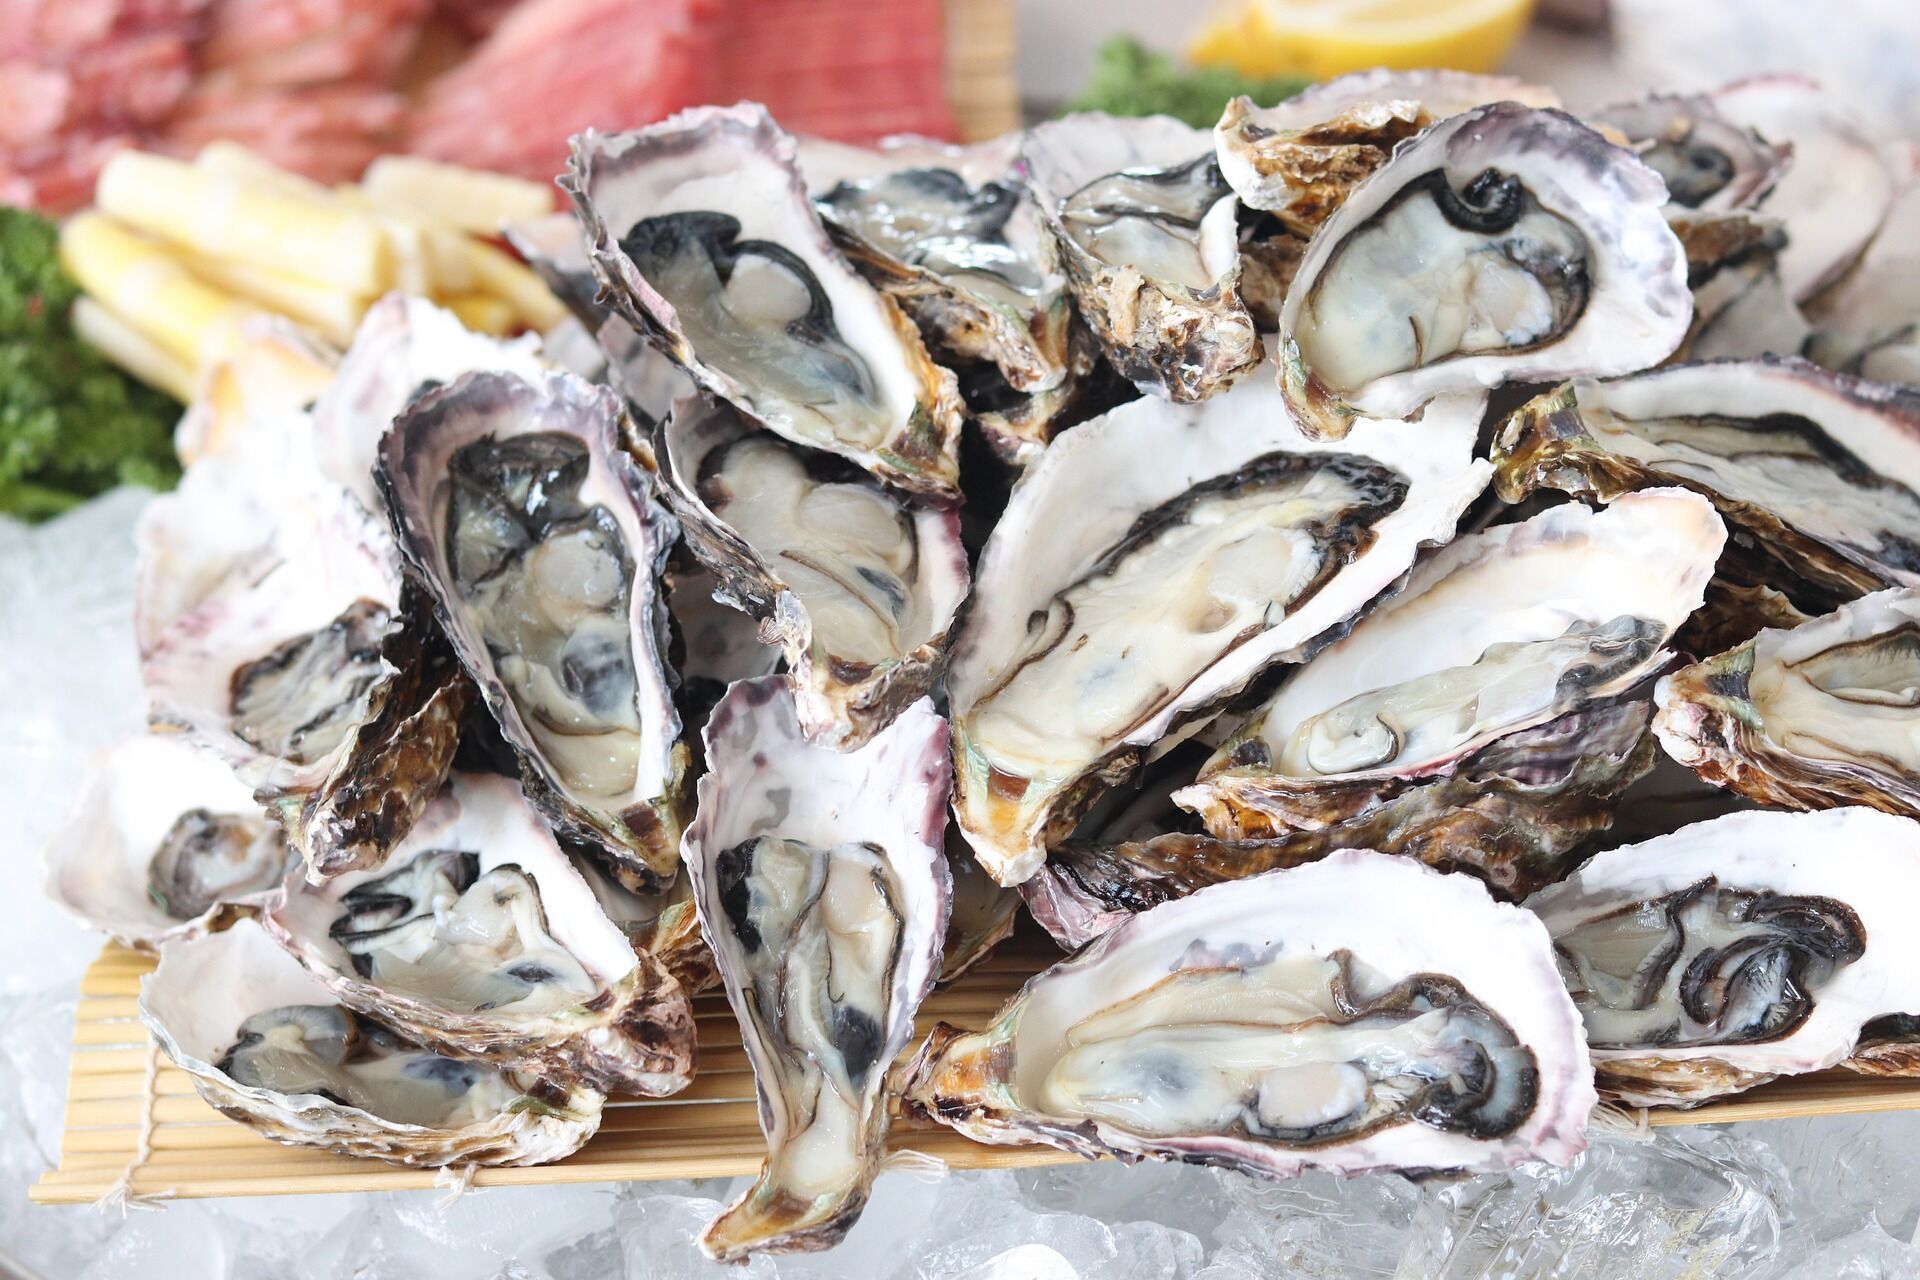 How to choose fresh oysters